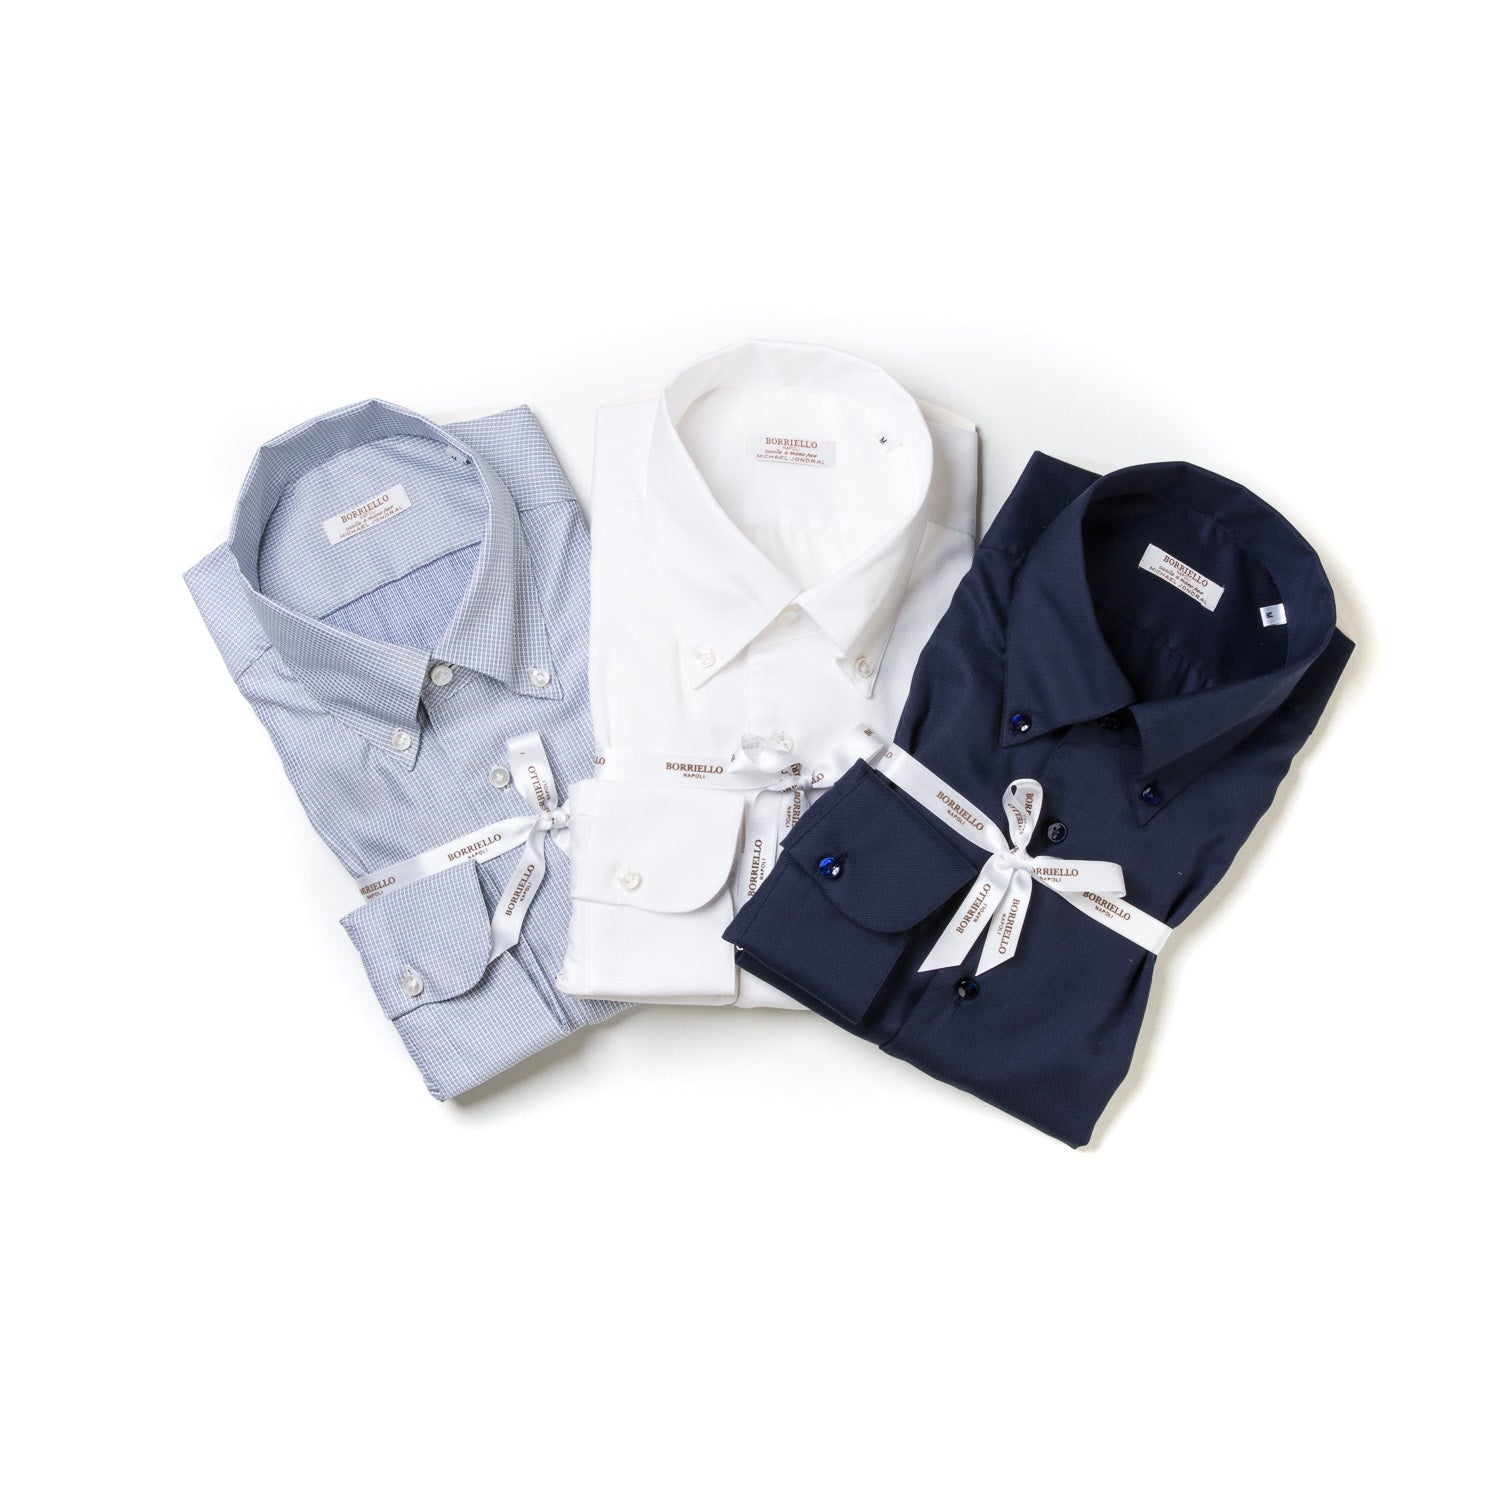 HIGH CLASS COMFORT WITH SARTORIAL SHIRTS IN NATURAL STRETCH